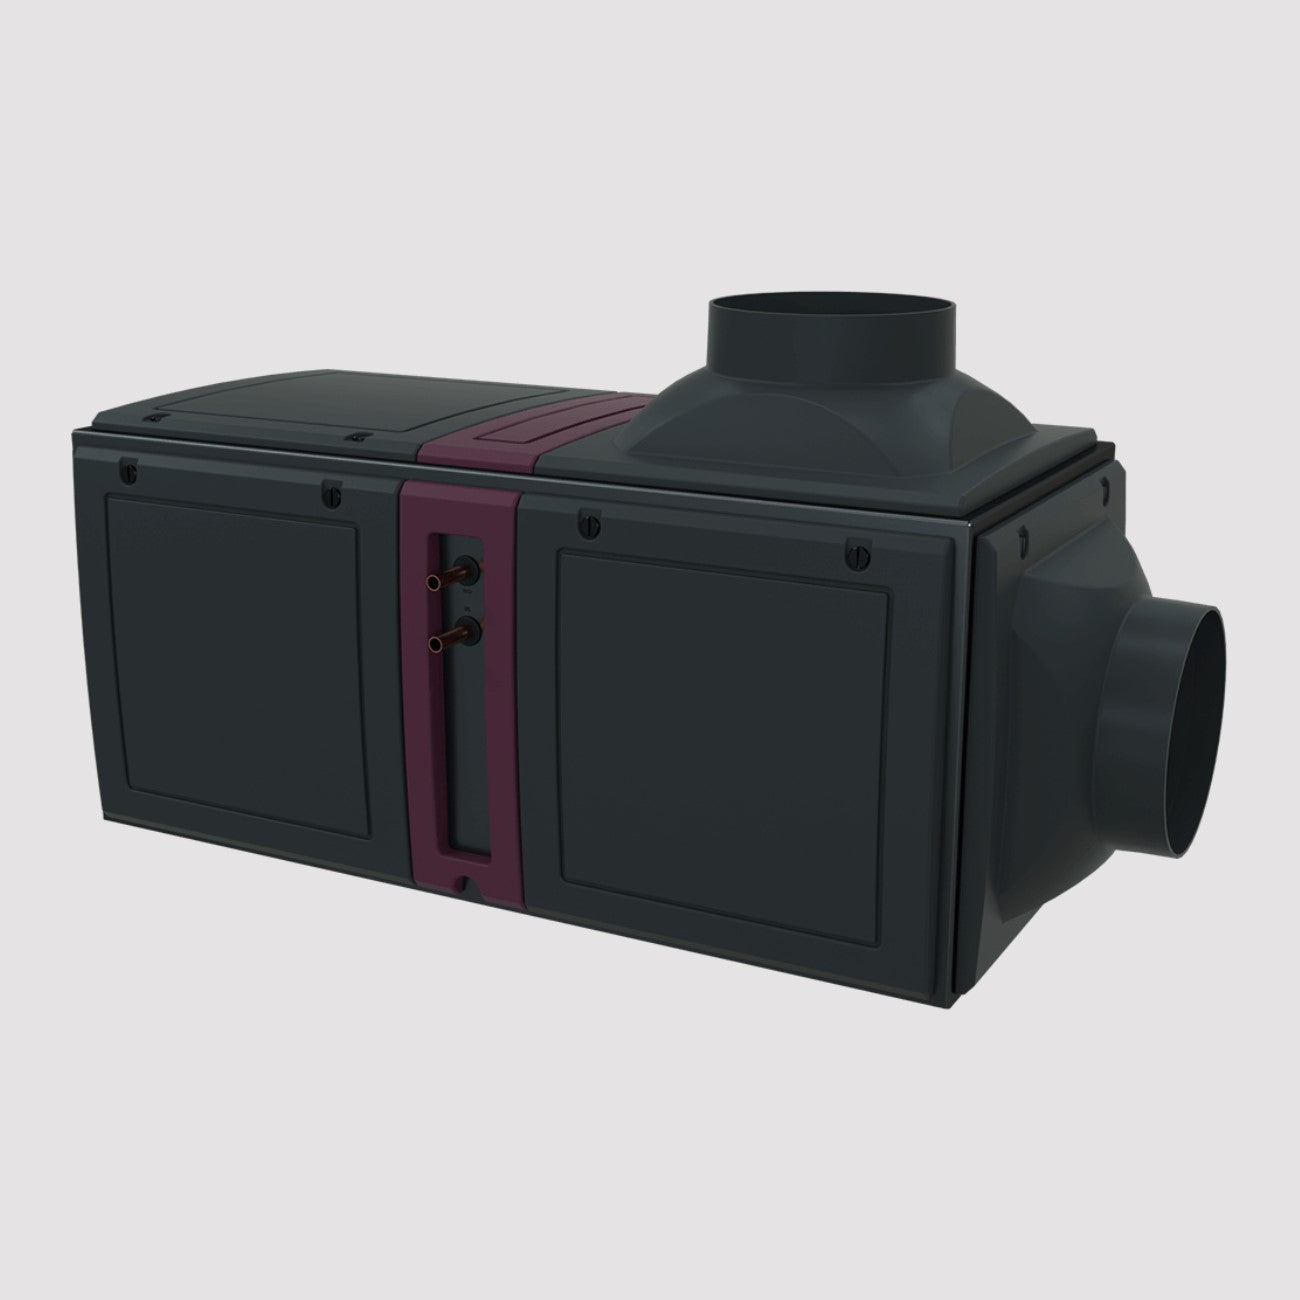 WINE GUARDIAN D088 DUCTED Cooling Unit - Back view